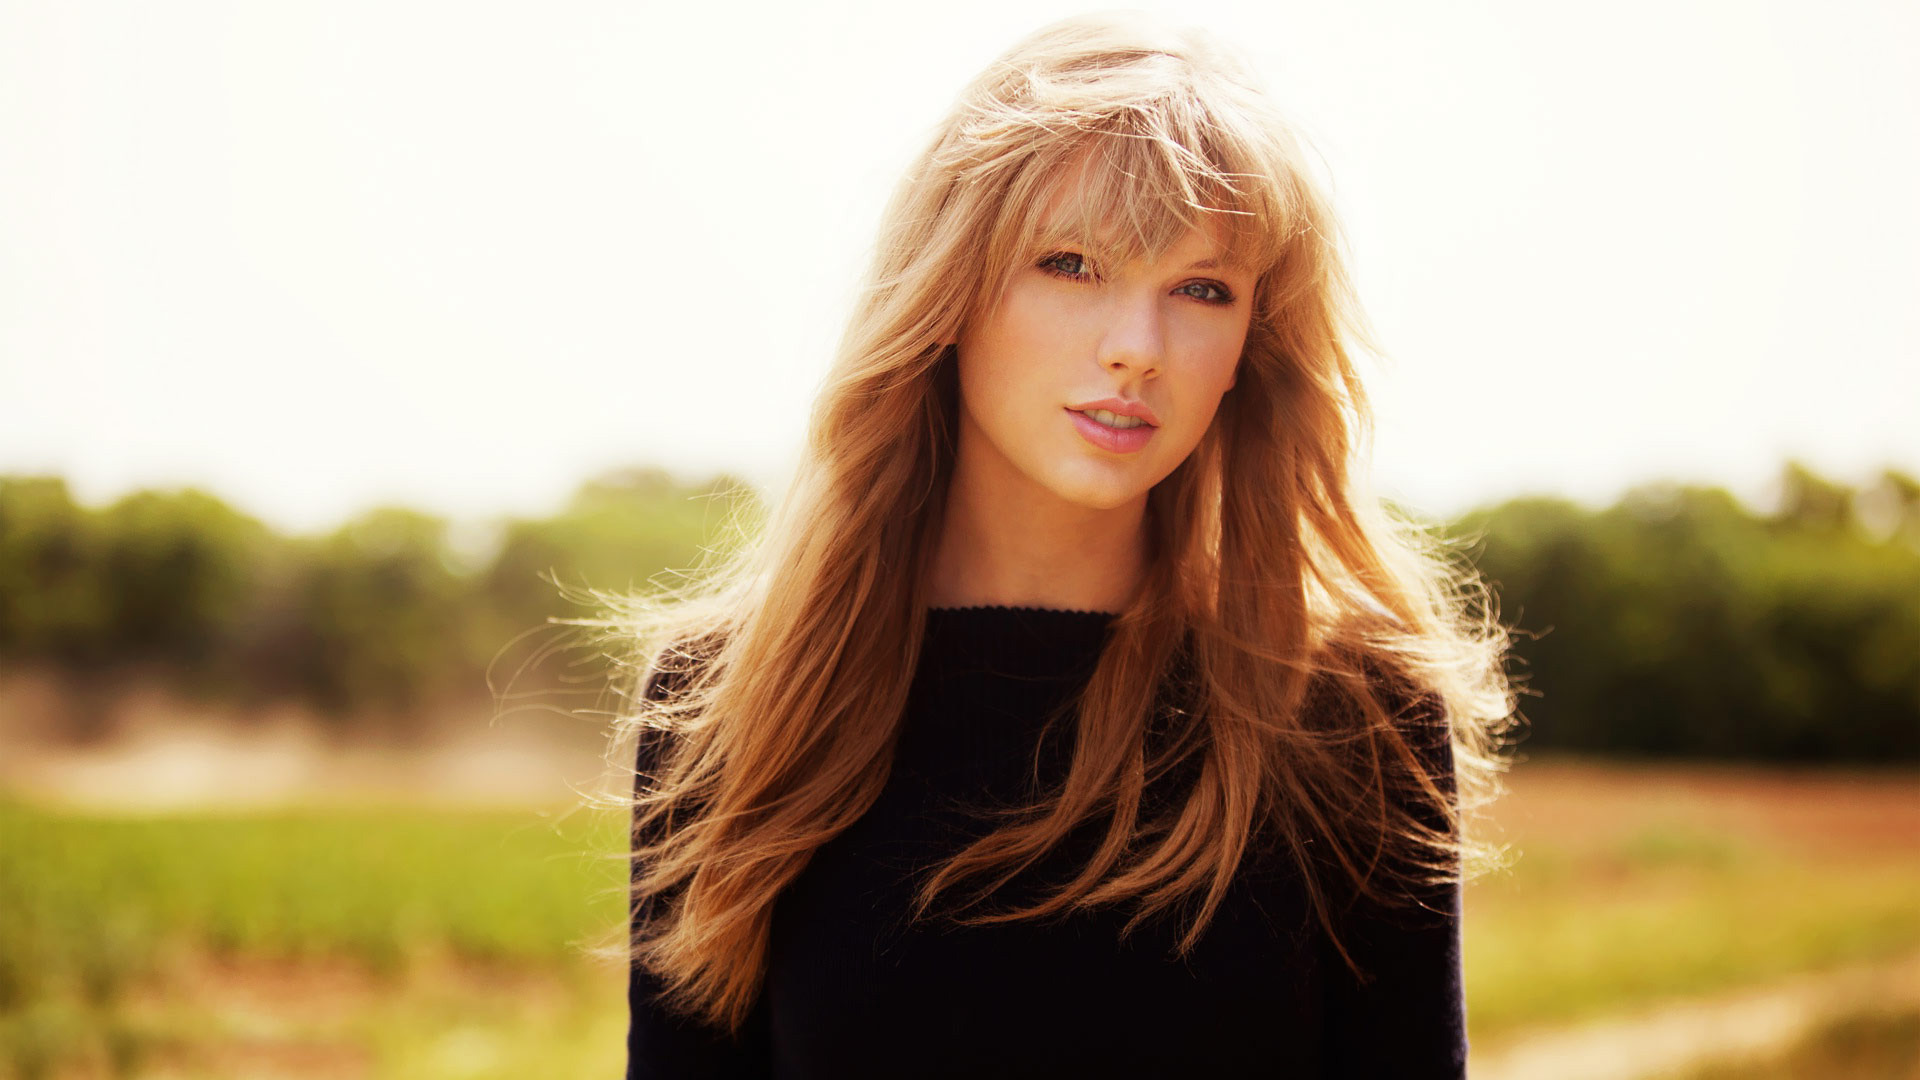 Taylor Swift Photo Wallpaper High Definition Quality